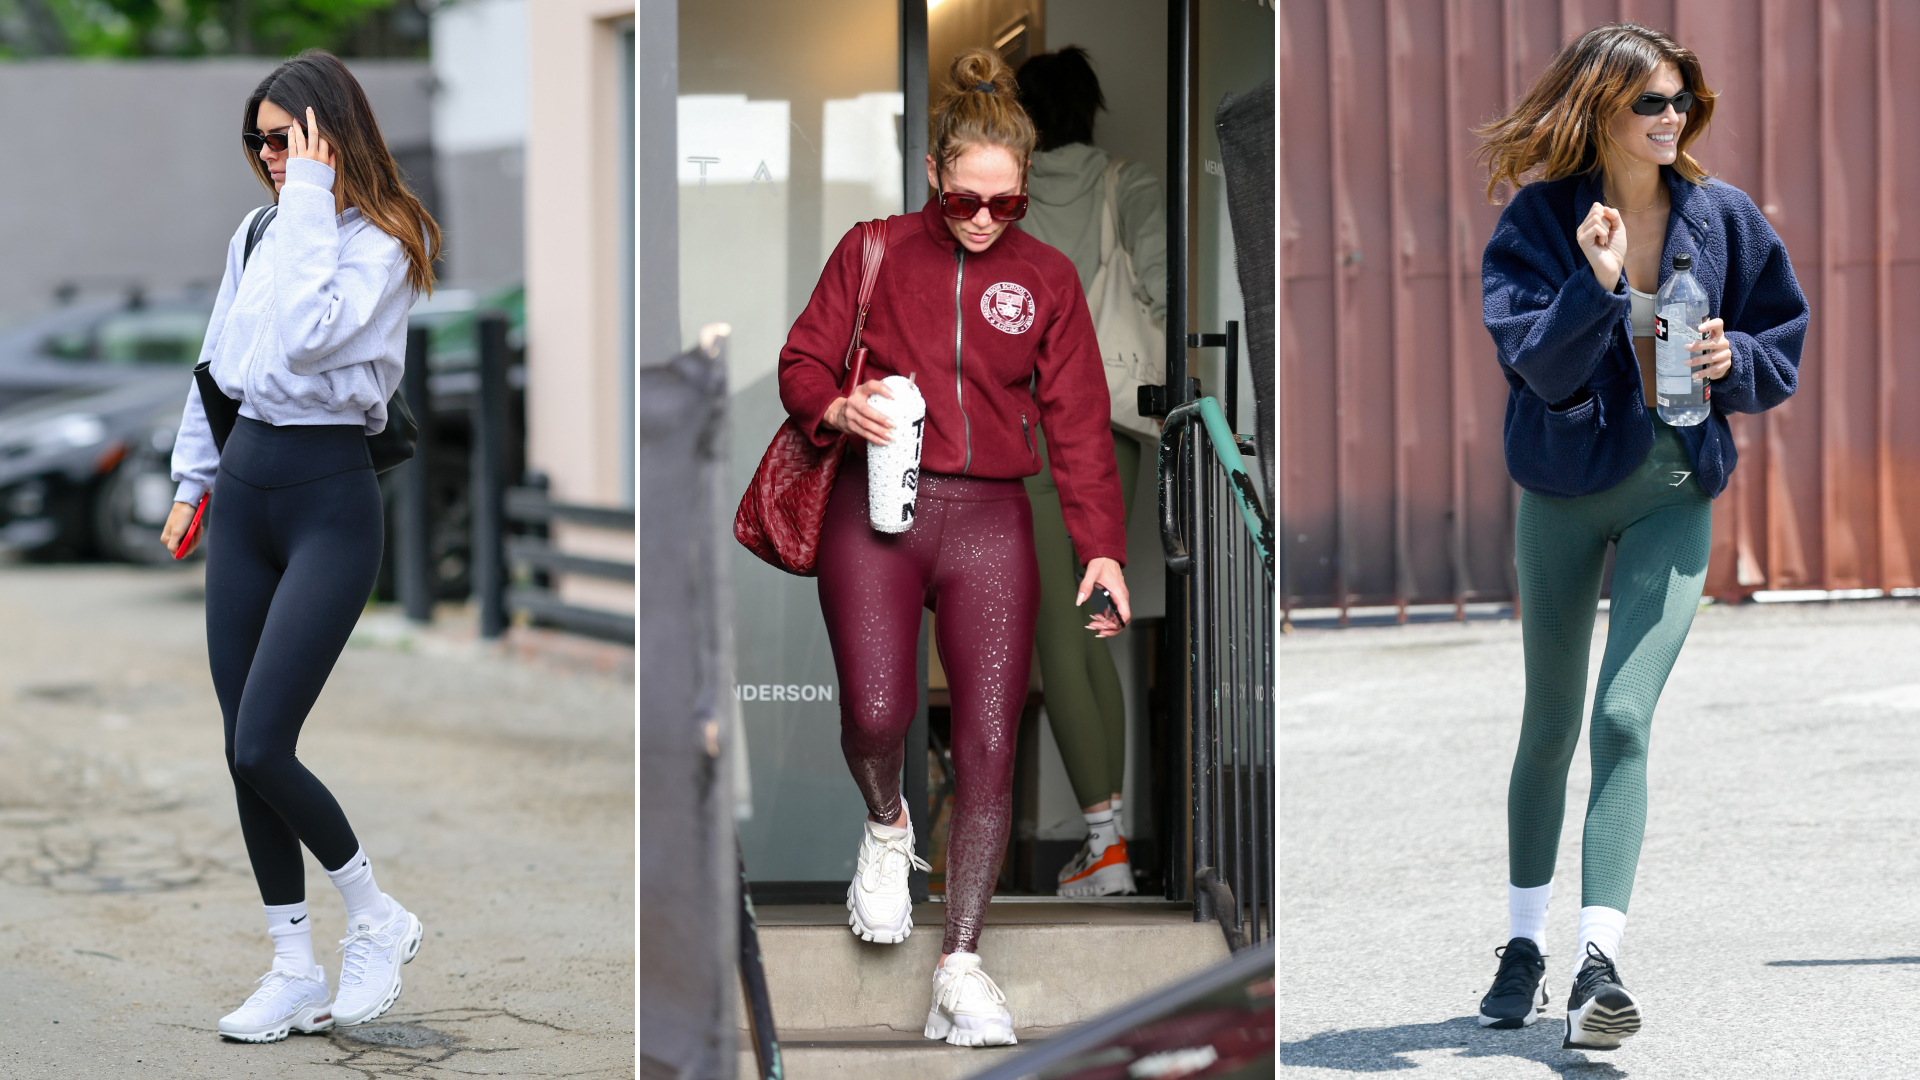 Jennifer Lopez's New Favorite Workout Shoes Are Here from the Future